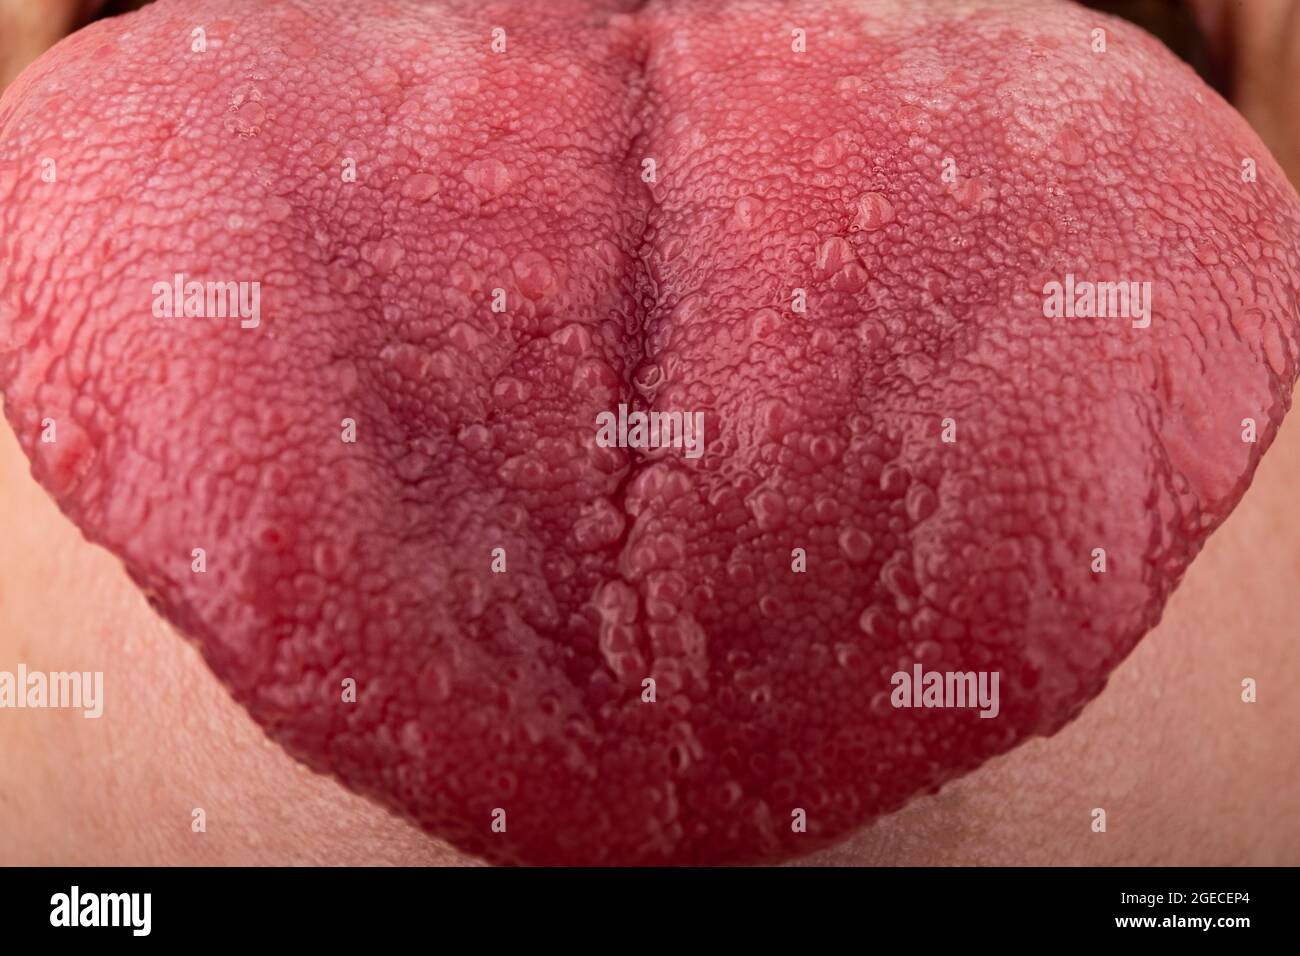 cracks in the tongue Candida diseases, red tongue stomatitis closeup. Stock Photo